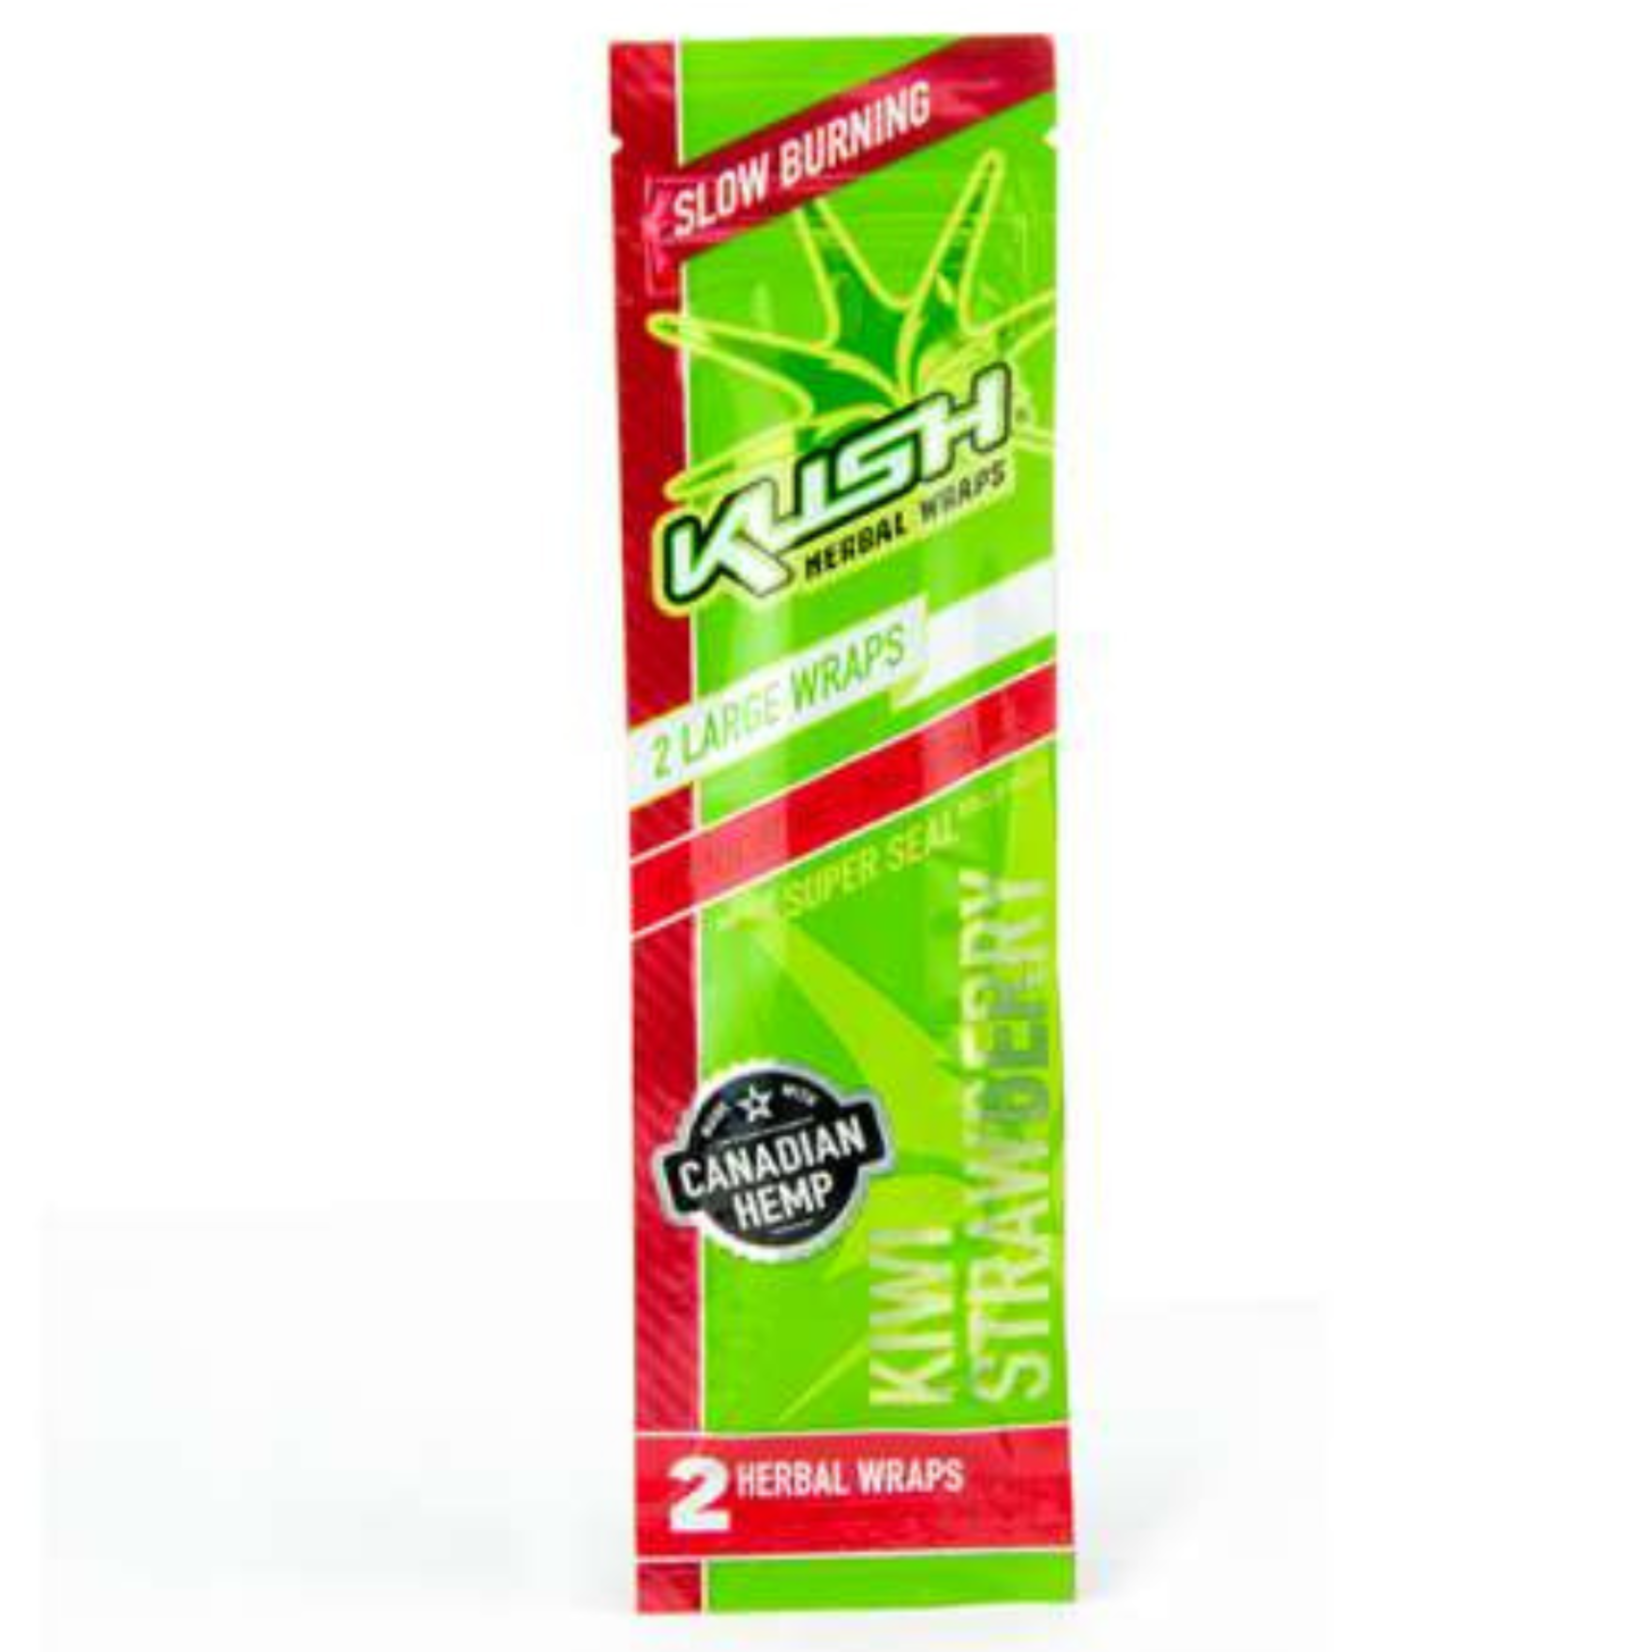 Kush Conical Herbal Wraps: 2 Pre-Rolled Conical Wraps